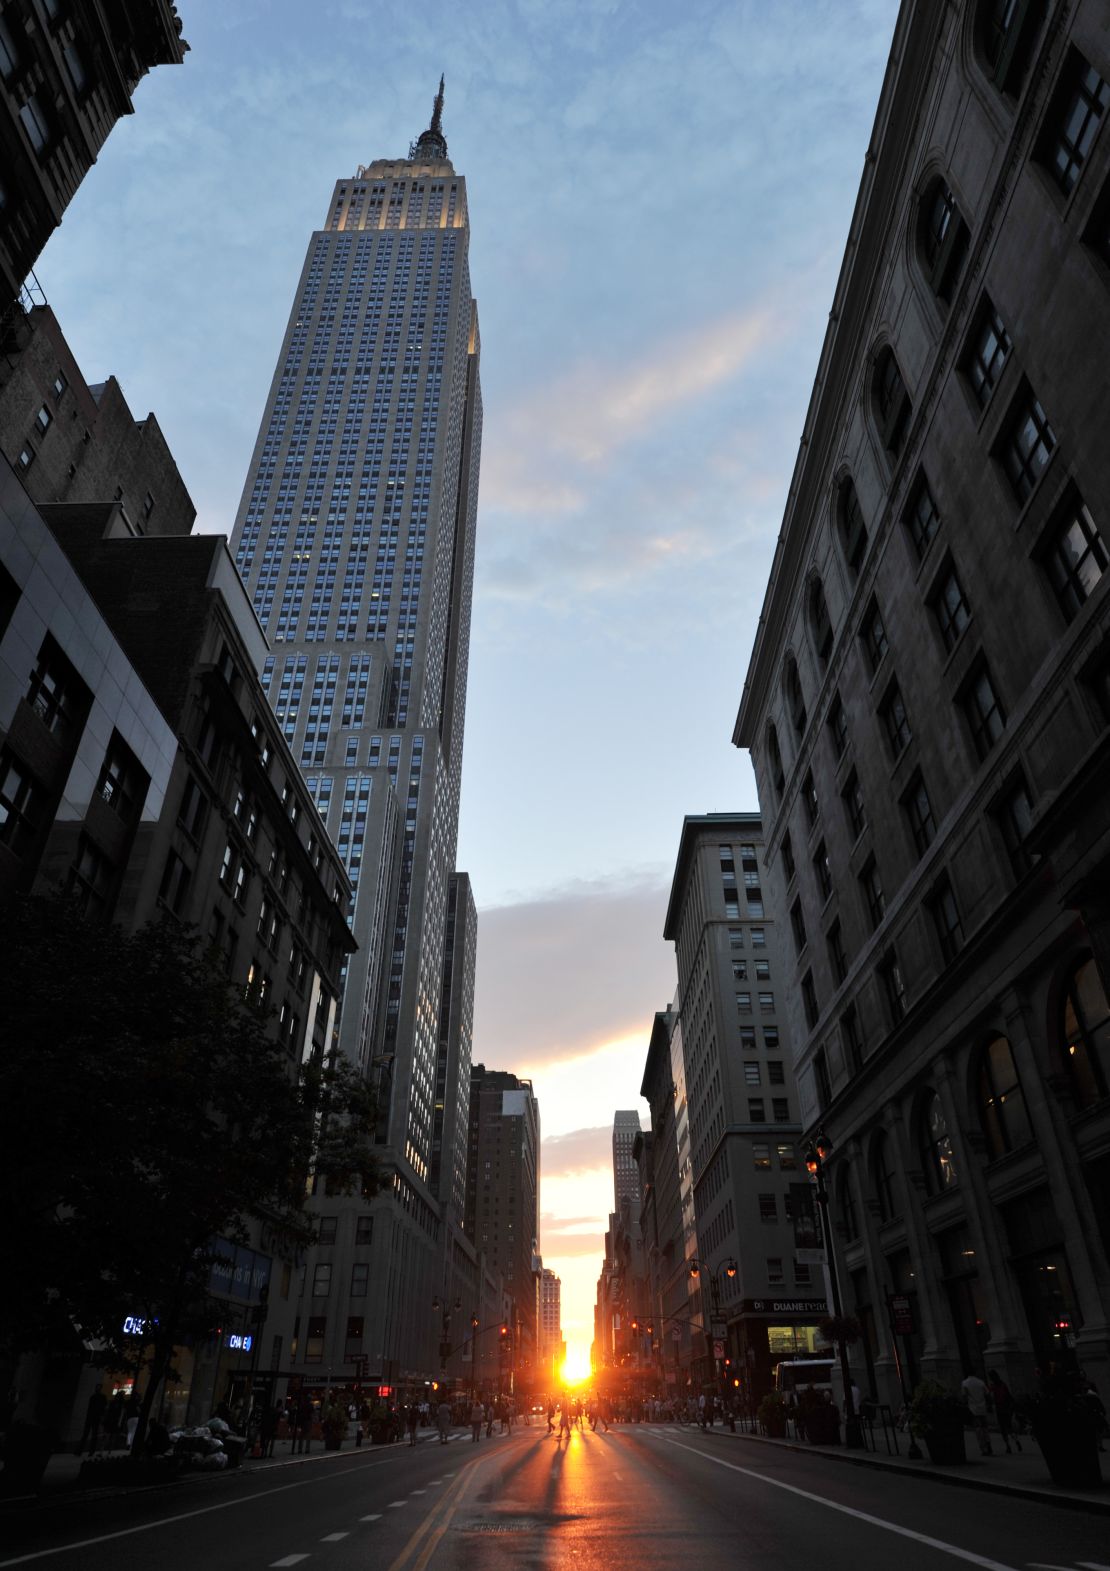 "Manhattanhenge," as coined by astrophysicist Neil deGrasse Tyson, occurred on May 29, 2014, in New York.